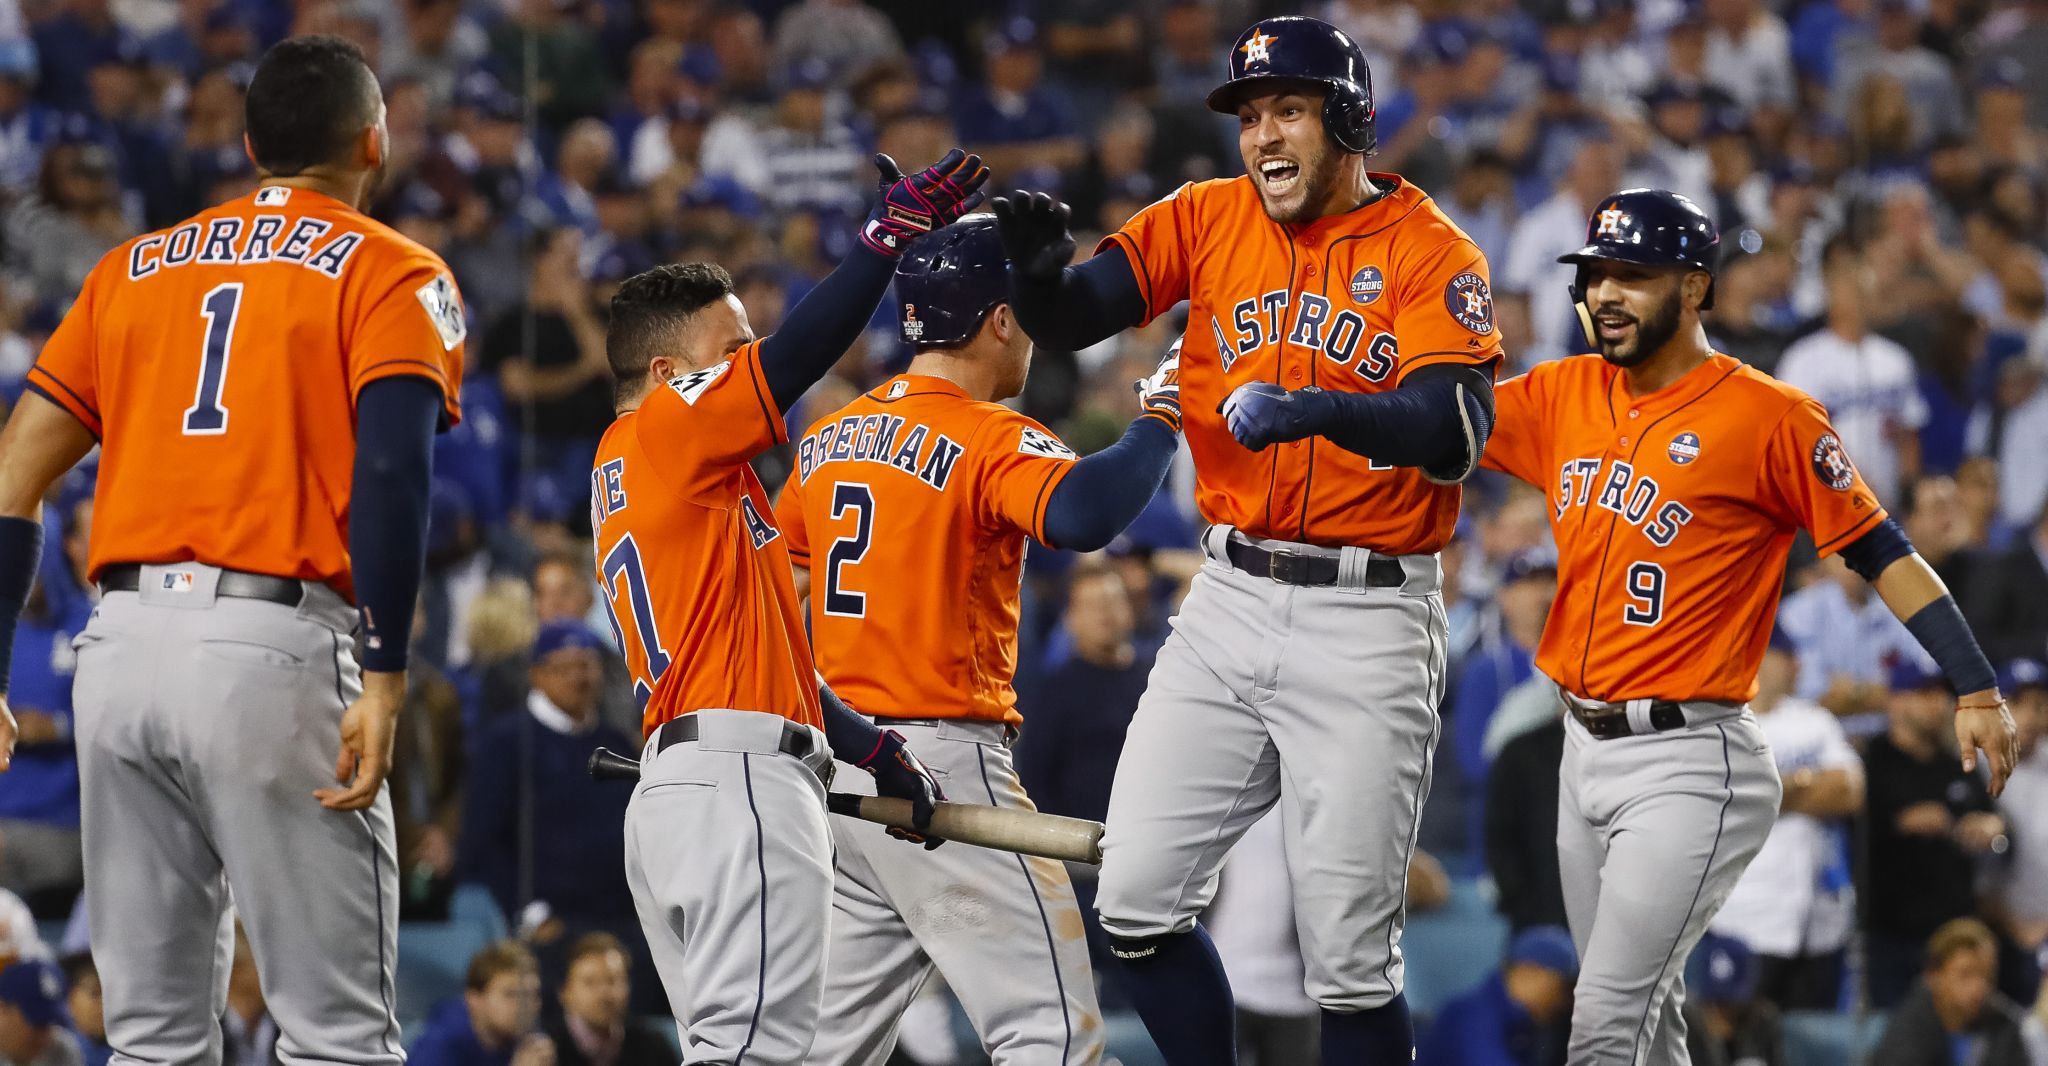 All on the line: the Astros and winner-take-all playoff games